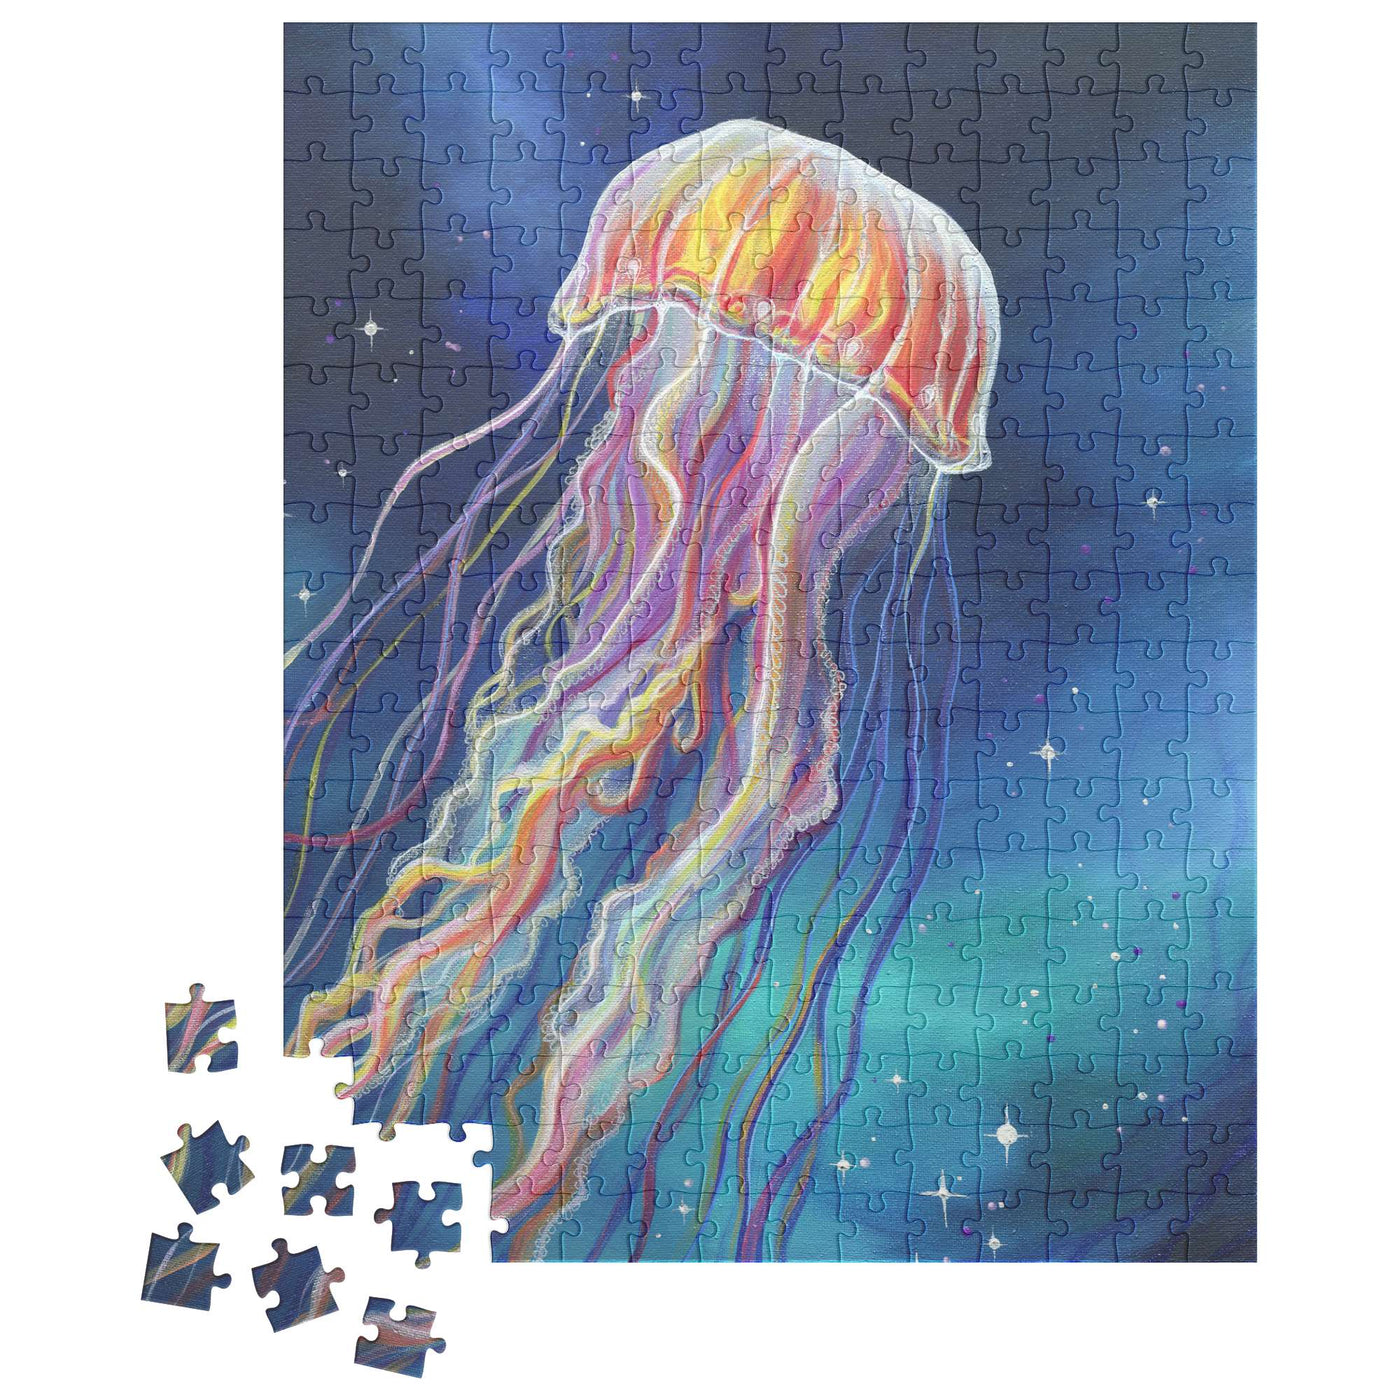 A Jellyfish Puzzle of a multicolored jellyfish, partially assembled with loose pieces at the bottom.